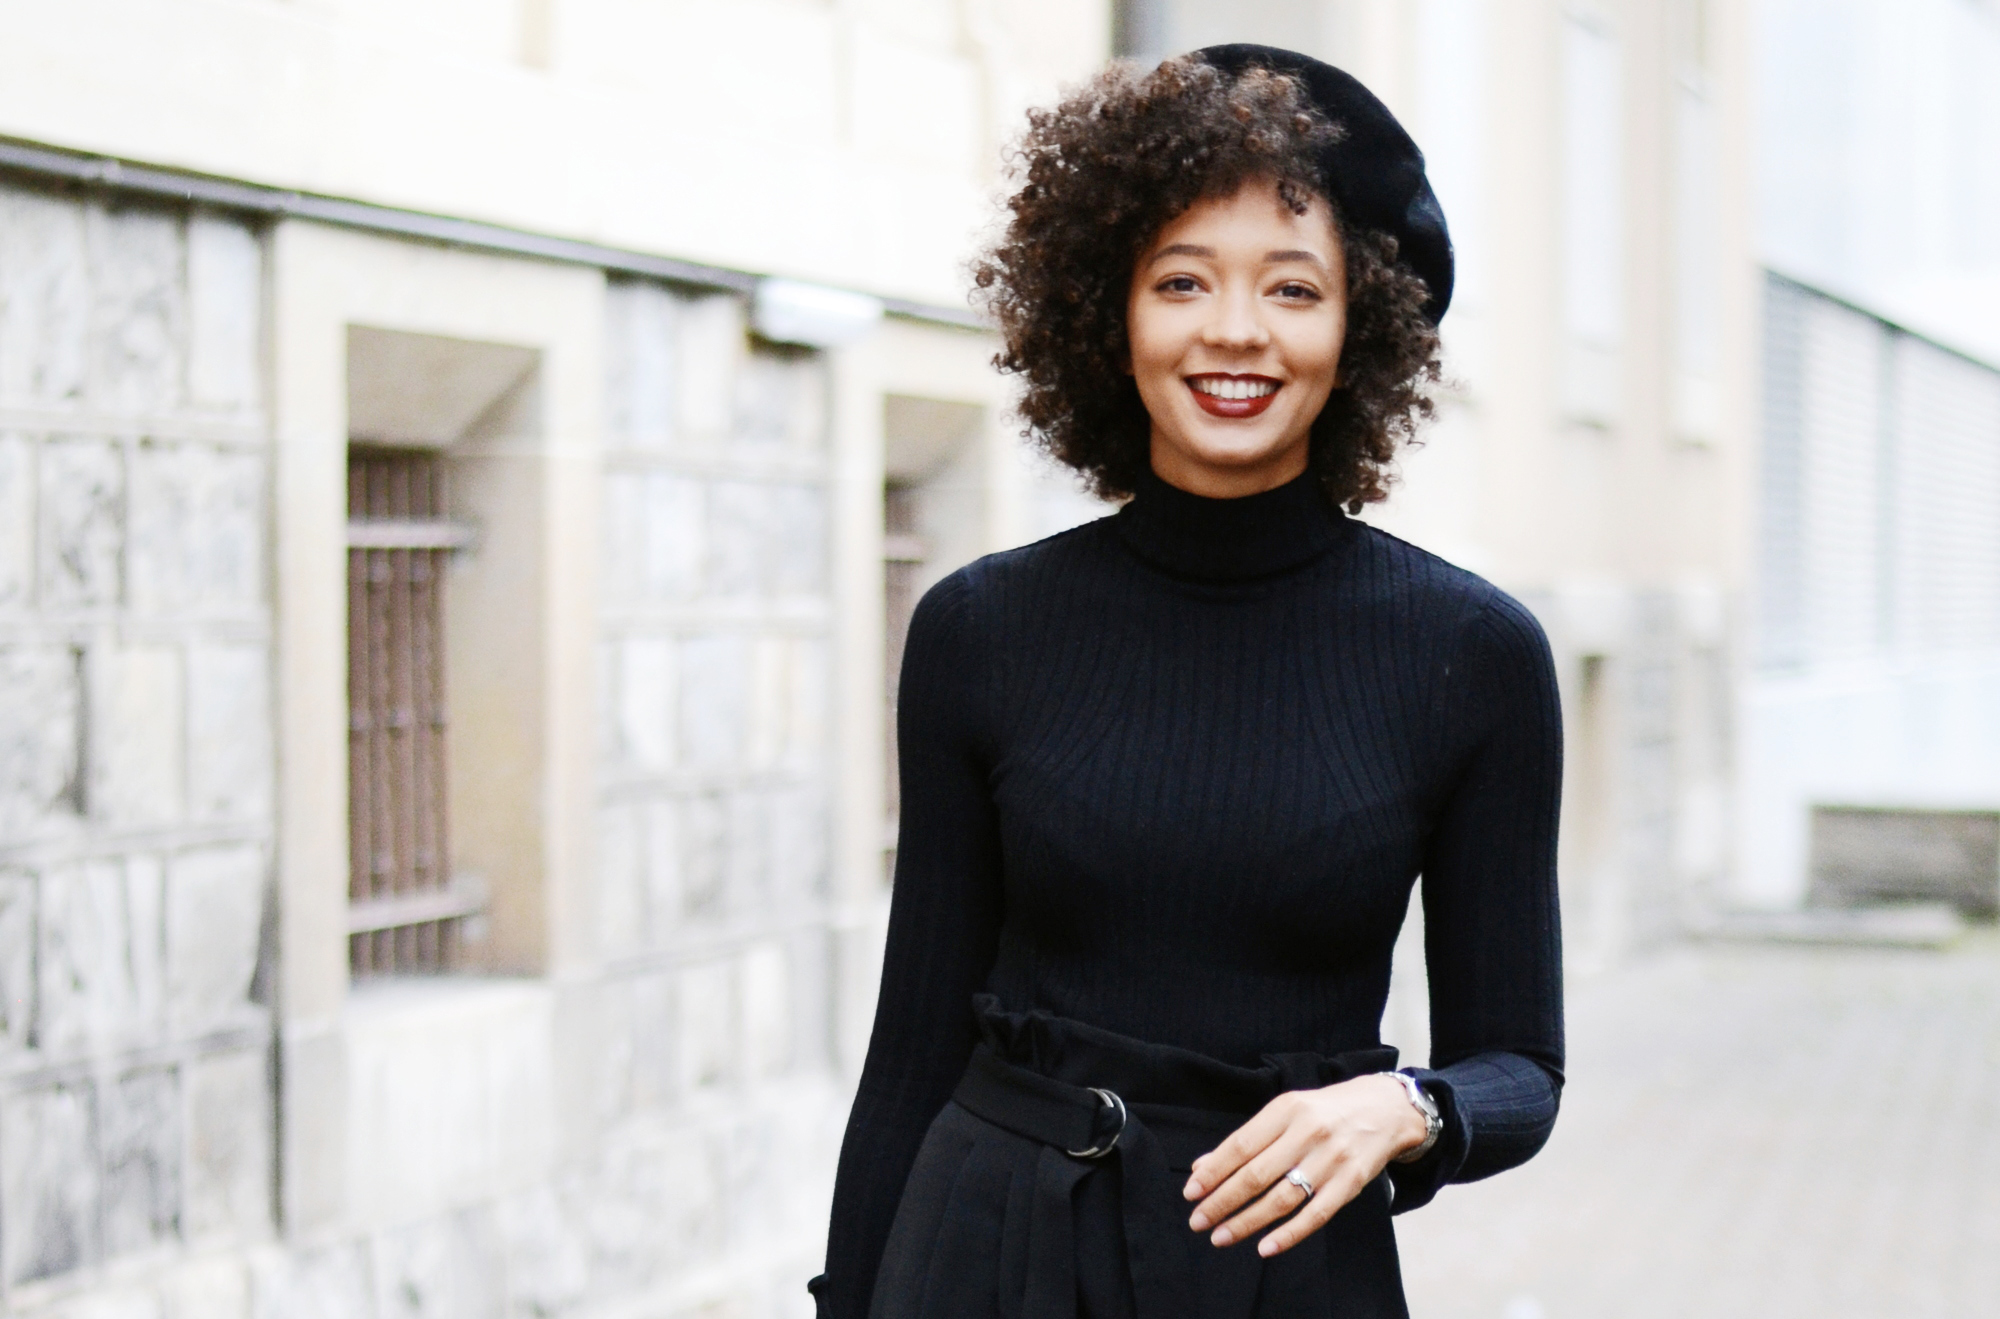 mercredie-blog-mode-geneve-suisse-fashion-blogger-all-black-outfit-chic-nars-audacious-lipstick-rouge-a-levres-louise-curly-hair-afro-cheveux-frises-beret-parisian-look